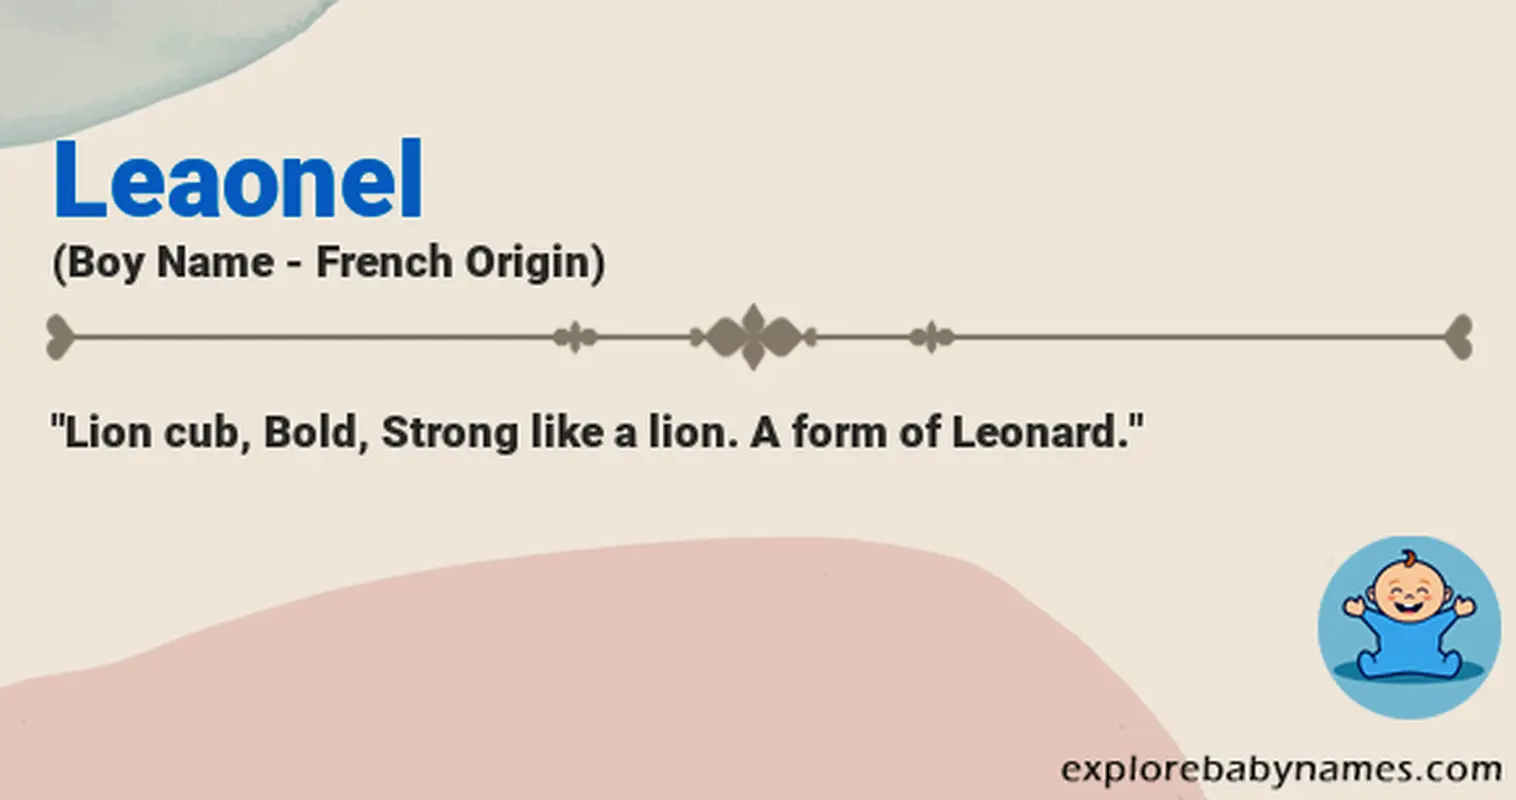 Meaning of Leaonel